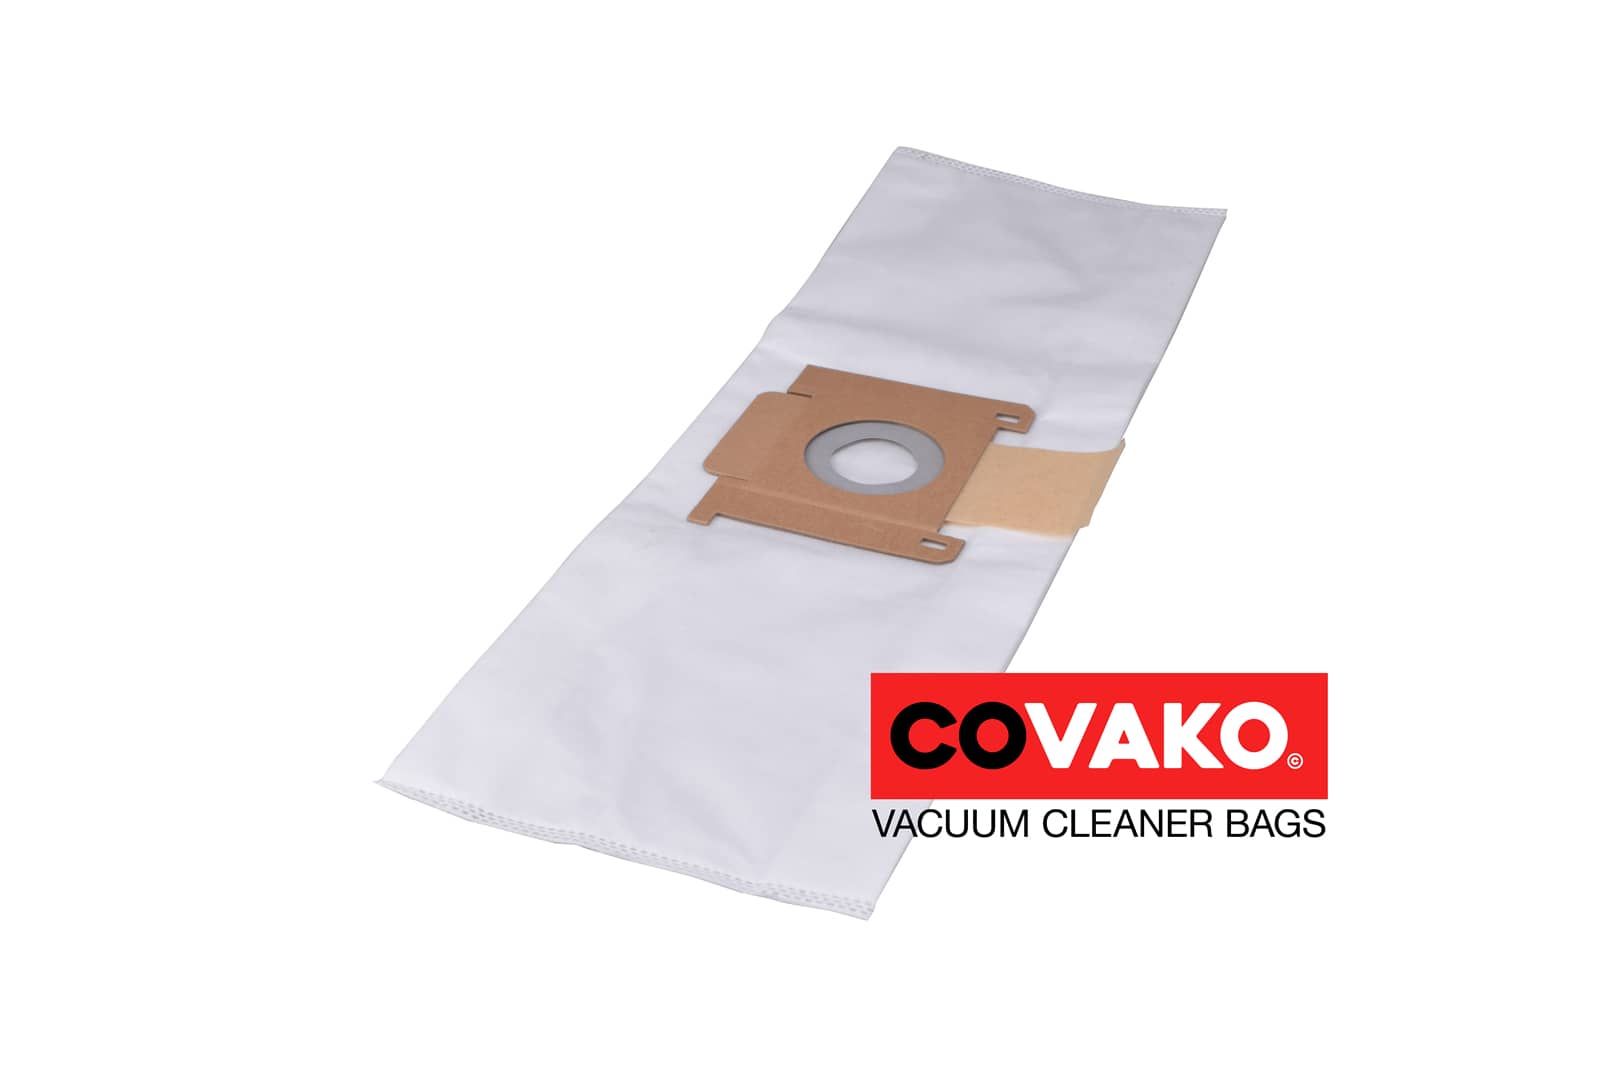 Ivac Steady Extra 6.0 / Synthesis - Ivac vacuum cleaner bags